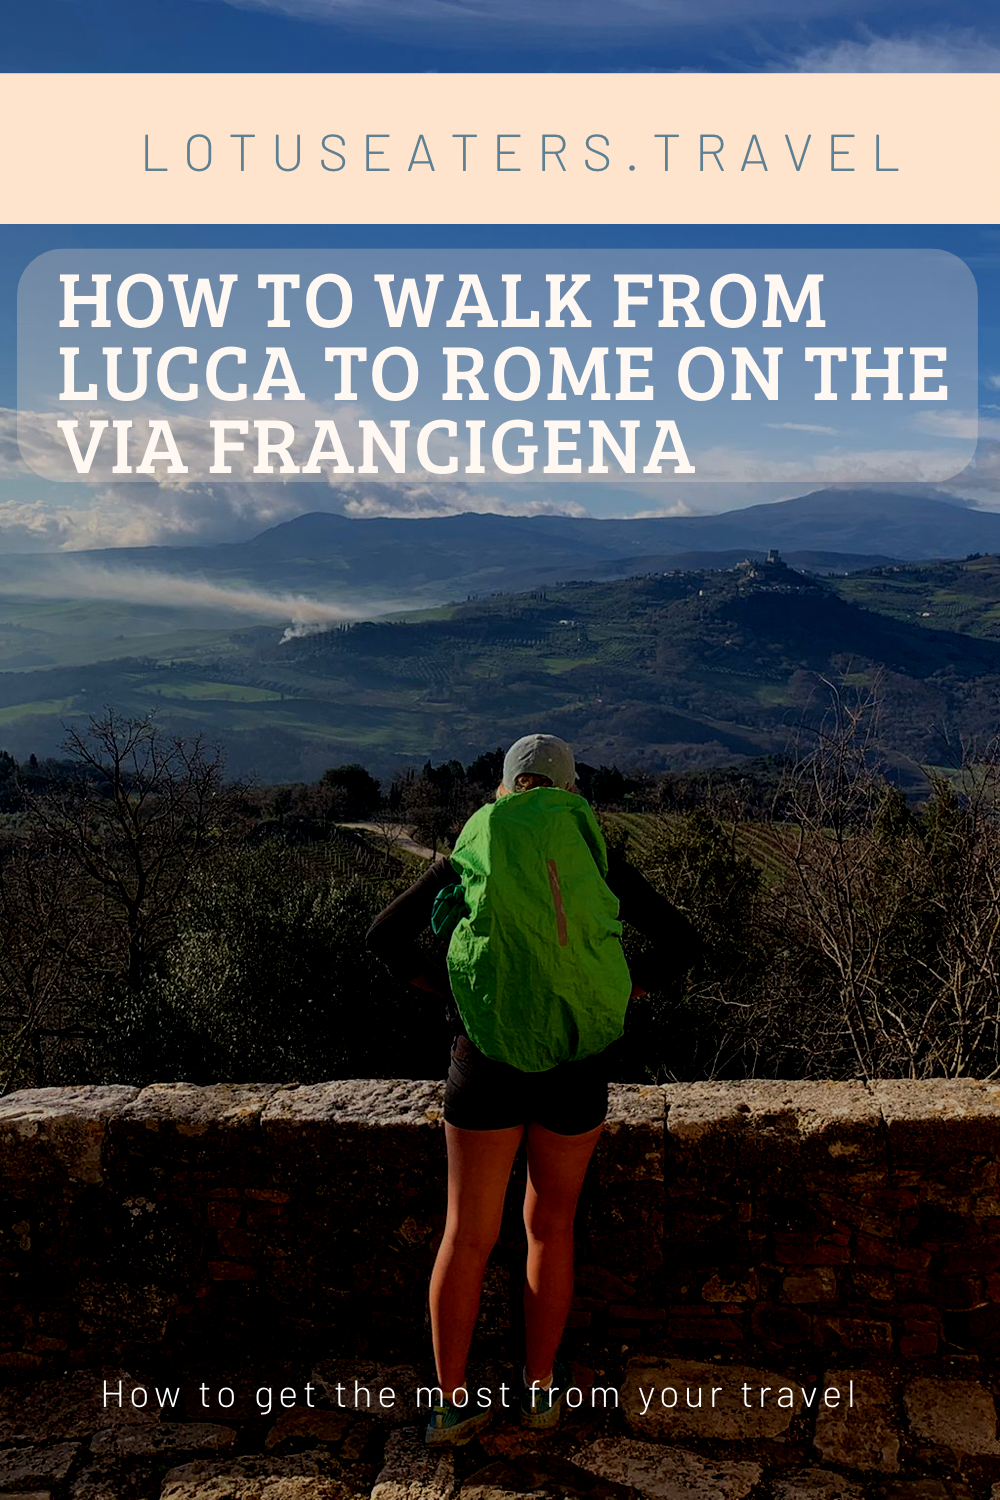 How to walk from Lucca to Rome on the Via Francigena